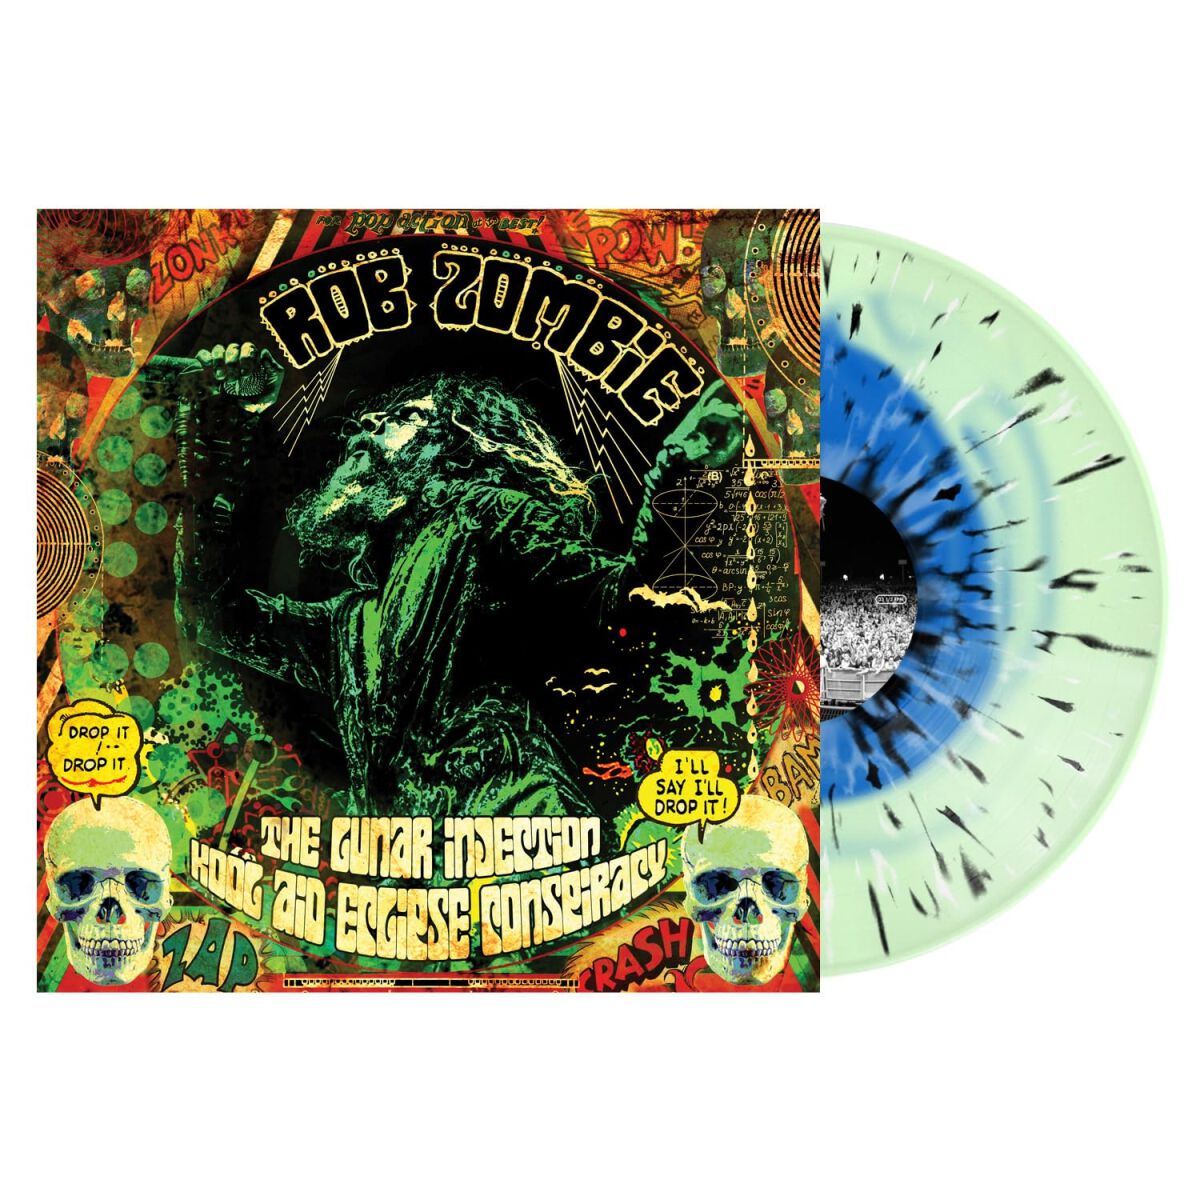 The lunar injection kool aid eclipse conspiracy von Rob Zombie - LP (Coloured, Re-Release)